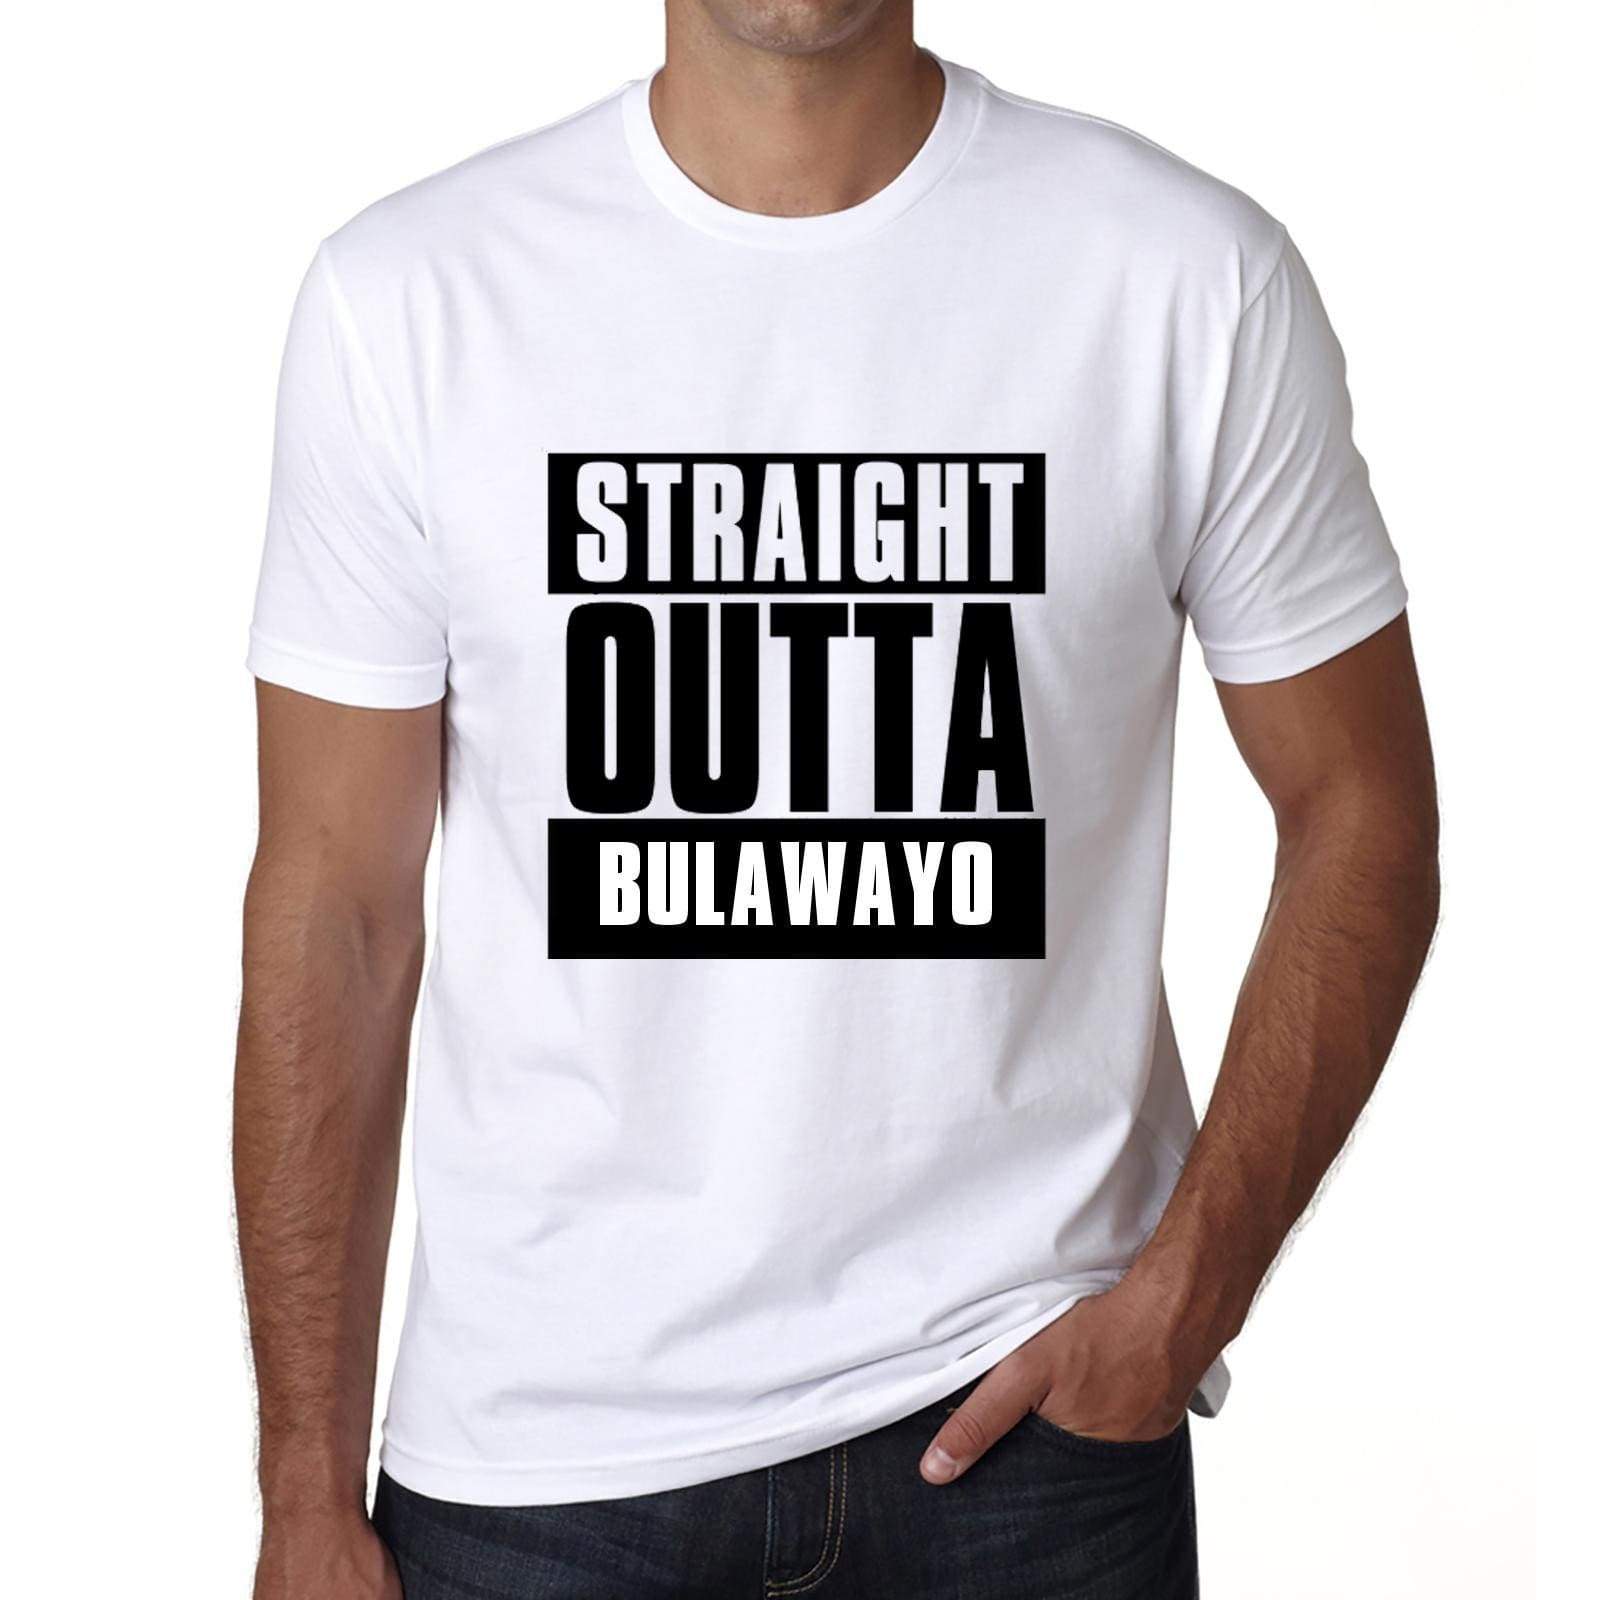 Straight Outta Bulawayo Mens Short Sleeve Round Neck T-Shirt 00027 - White / S - Casual